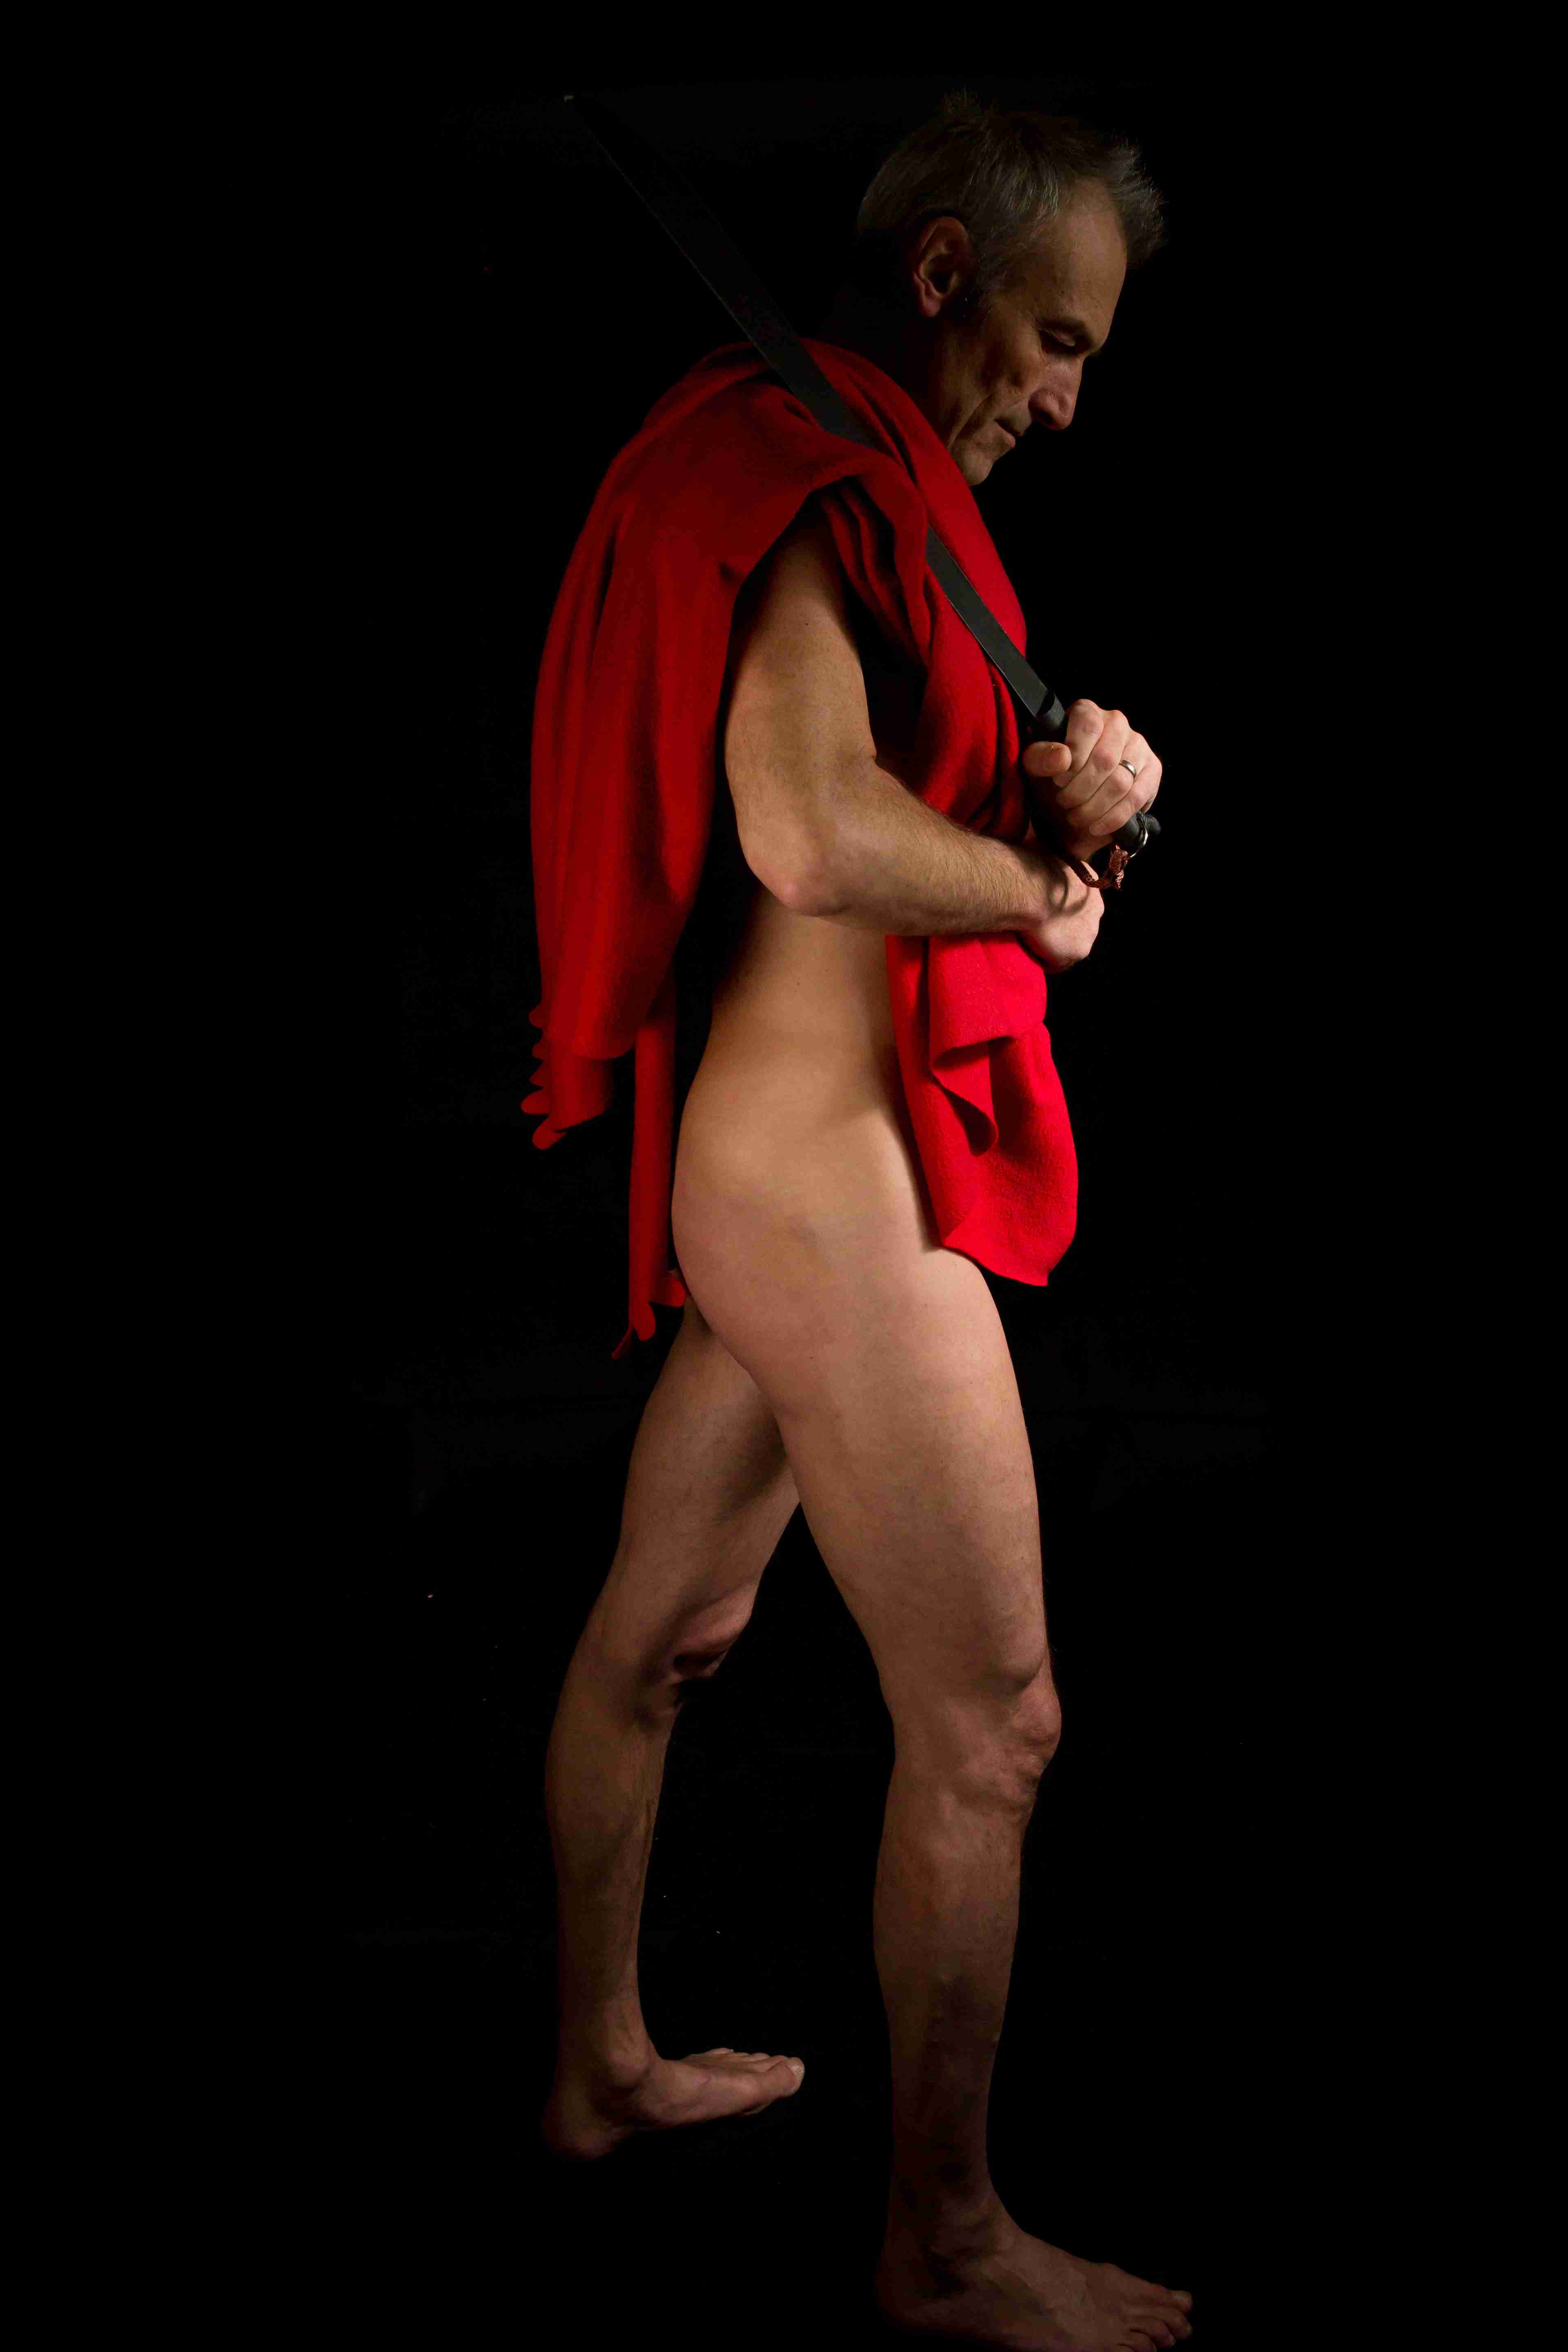 life model Julian, carrying a red coat and black belt for an artist to draw or sculpt